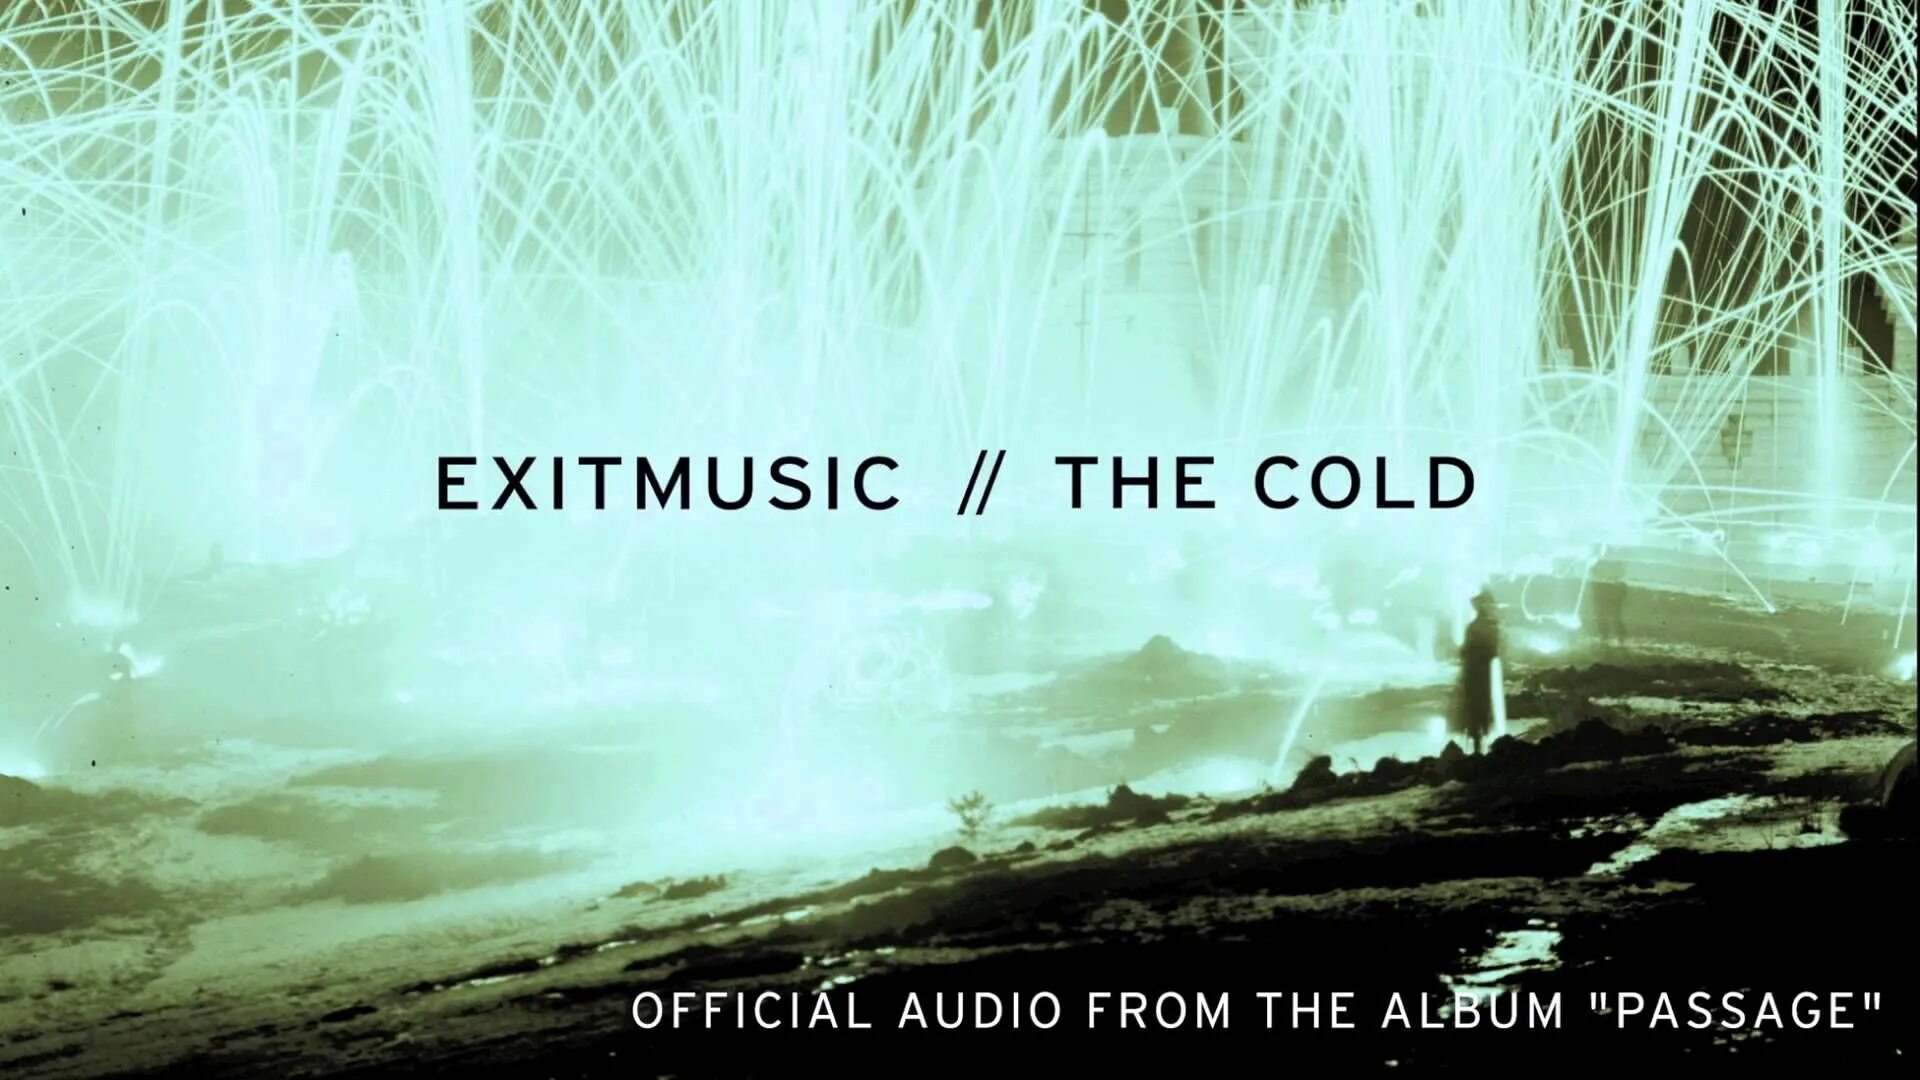 Музыка cold. The Cold Exitmusic. Exitmusic the Cold перевод песни. Exitmusic from Silence. Exit Music.